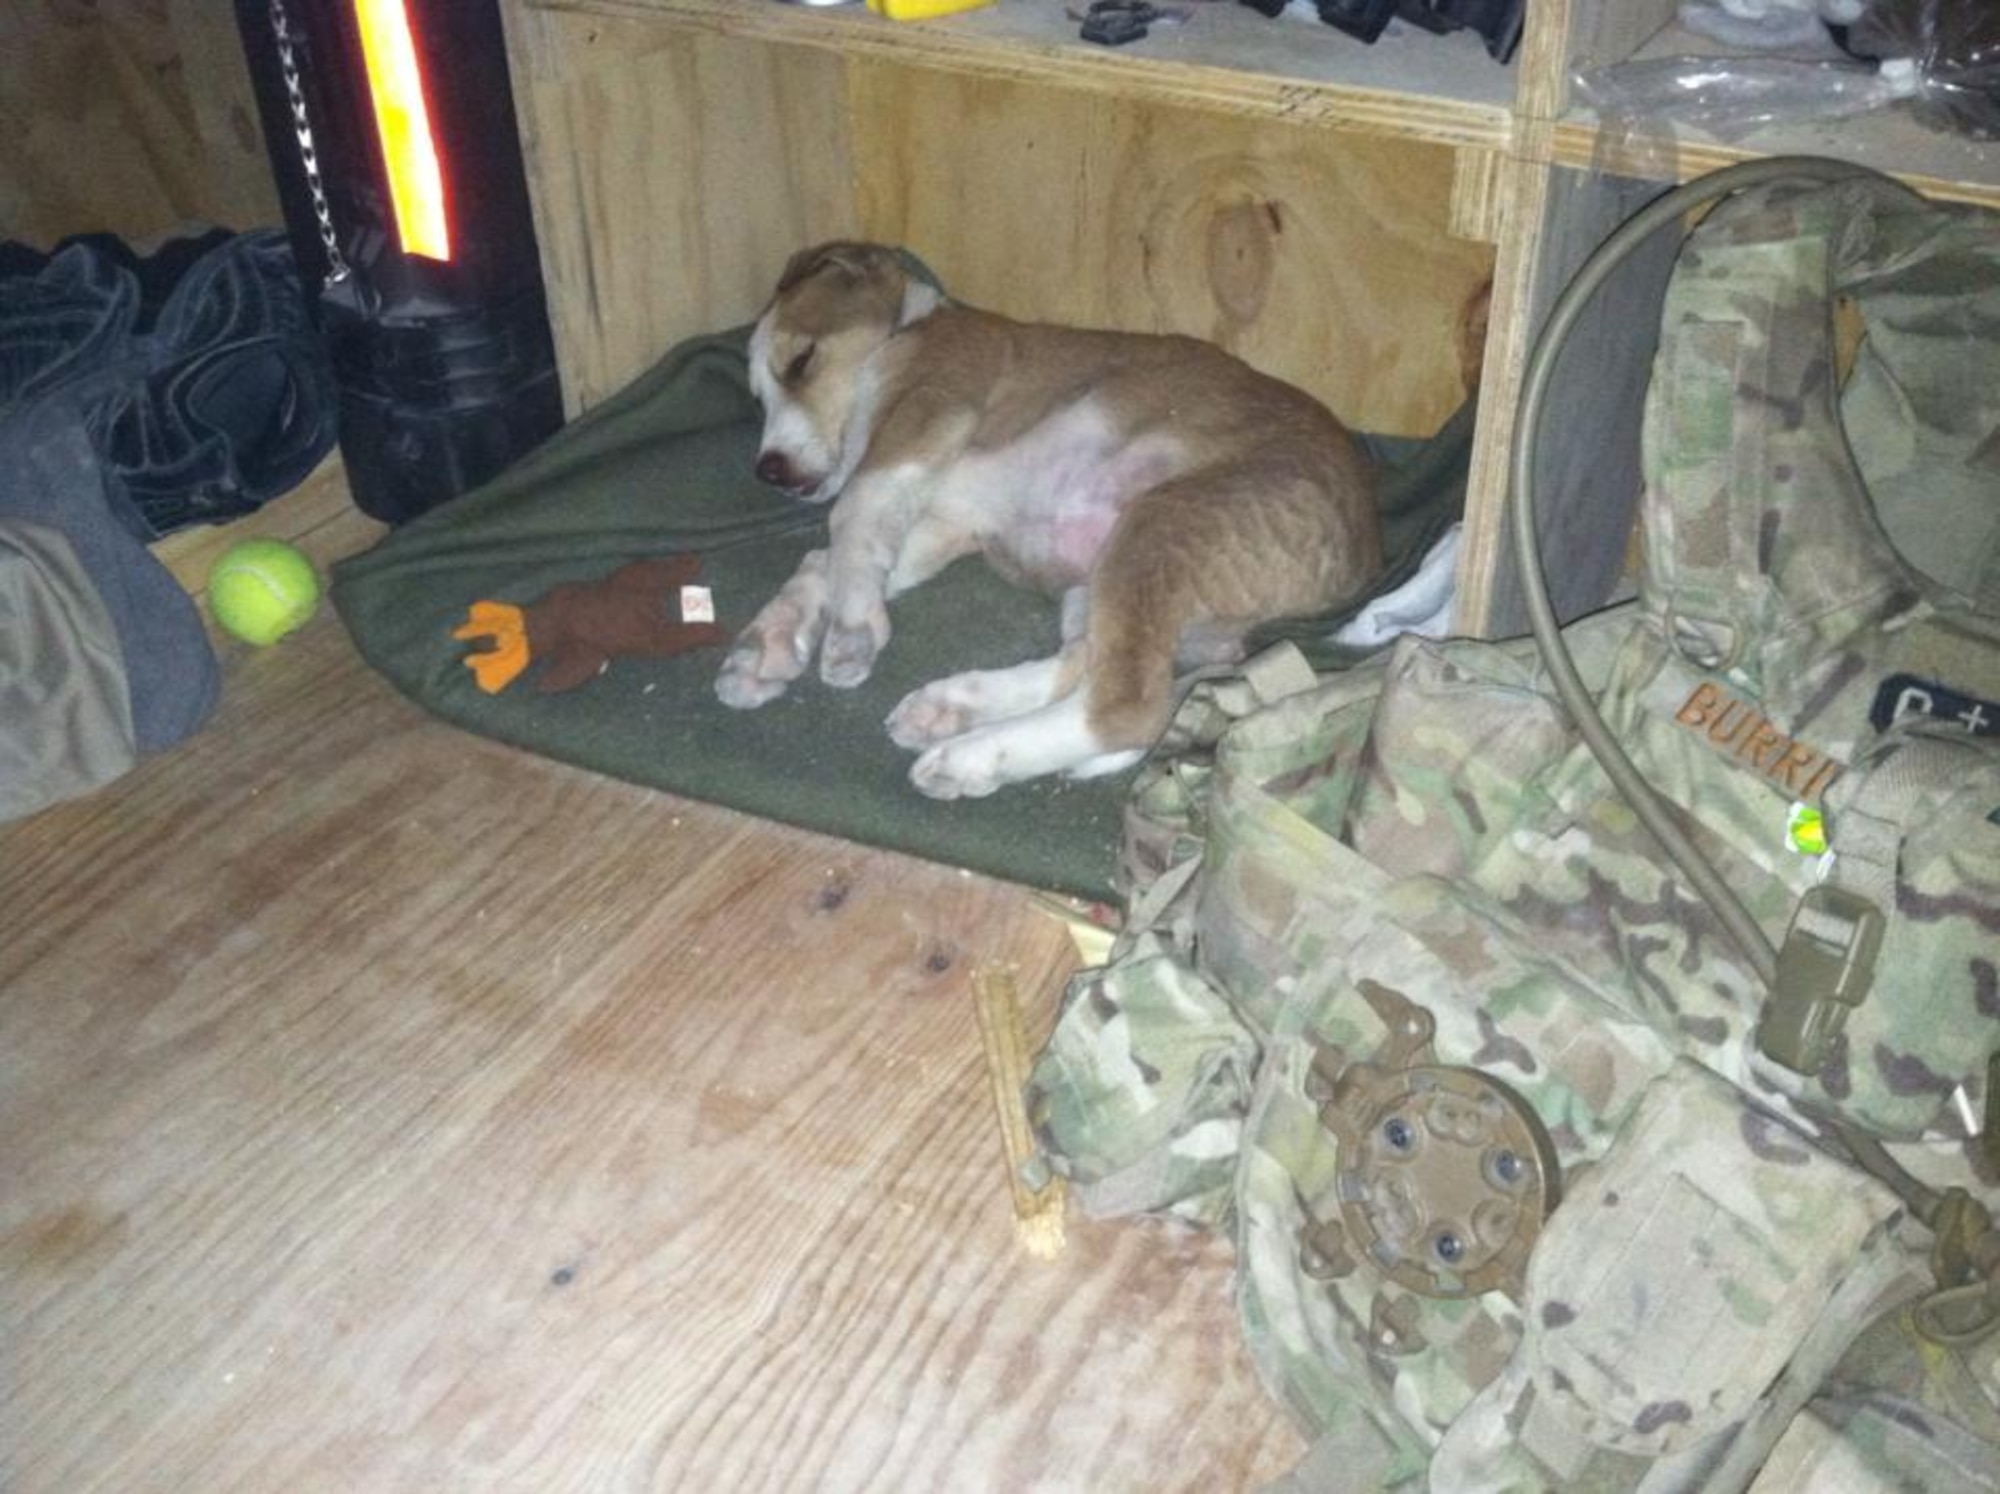 Lyla, an Afghan Kuchi, falls asleep next to Staff Sgt. Thomas Burright’s, 7th Logistics Readiness Squadron, gear during a recent deployment to Afghanistan. In order to bring Lyla back to the U.S., Burright contacted an organization known as The Puppy Rescue Mission to raise the funds necessary for her travel. (Courtesy photo)